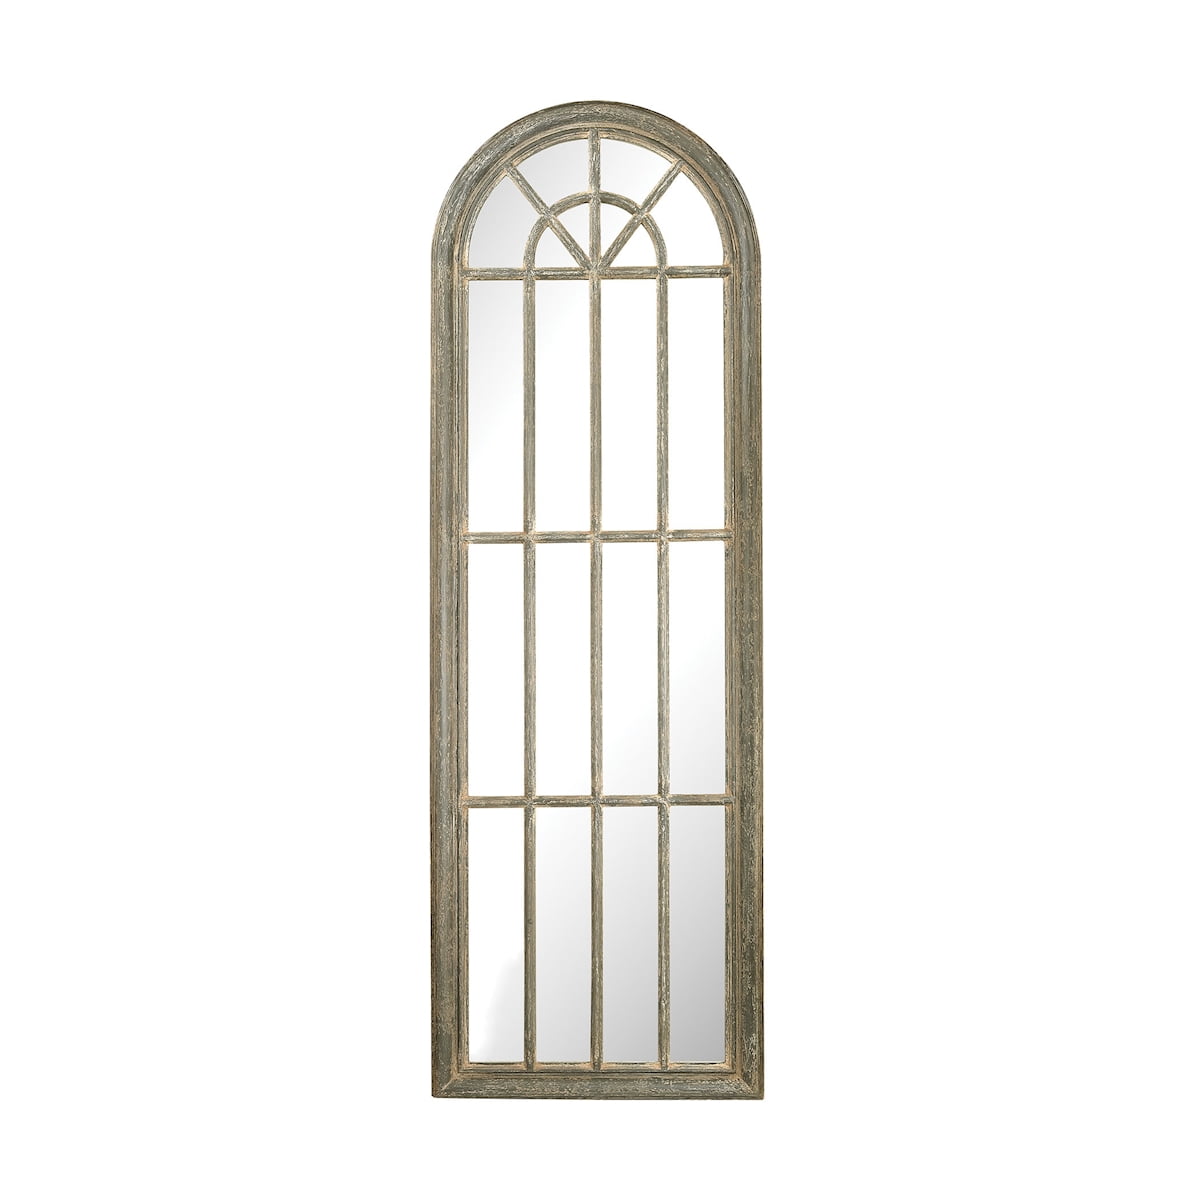 Full Length Arched Window Pane Mirror, Small Arched Window Pane Mirror